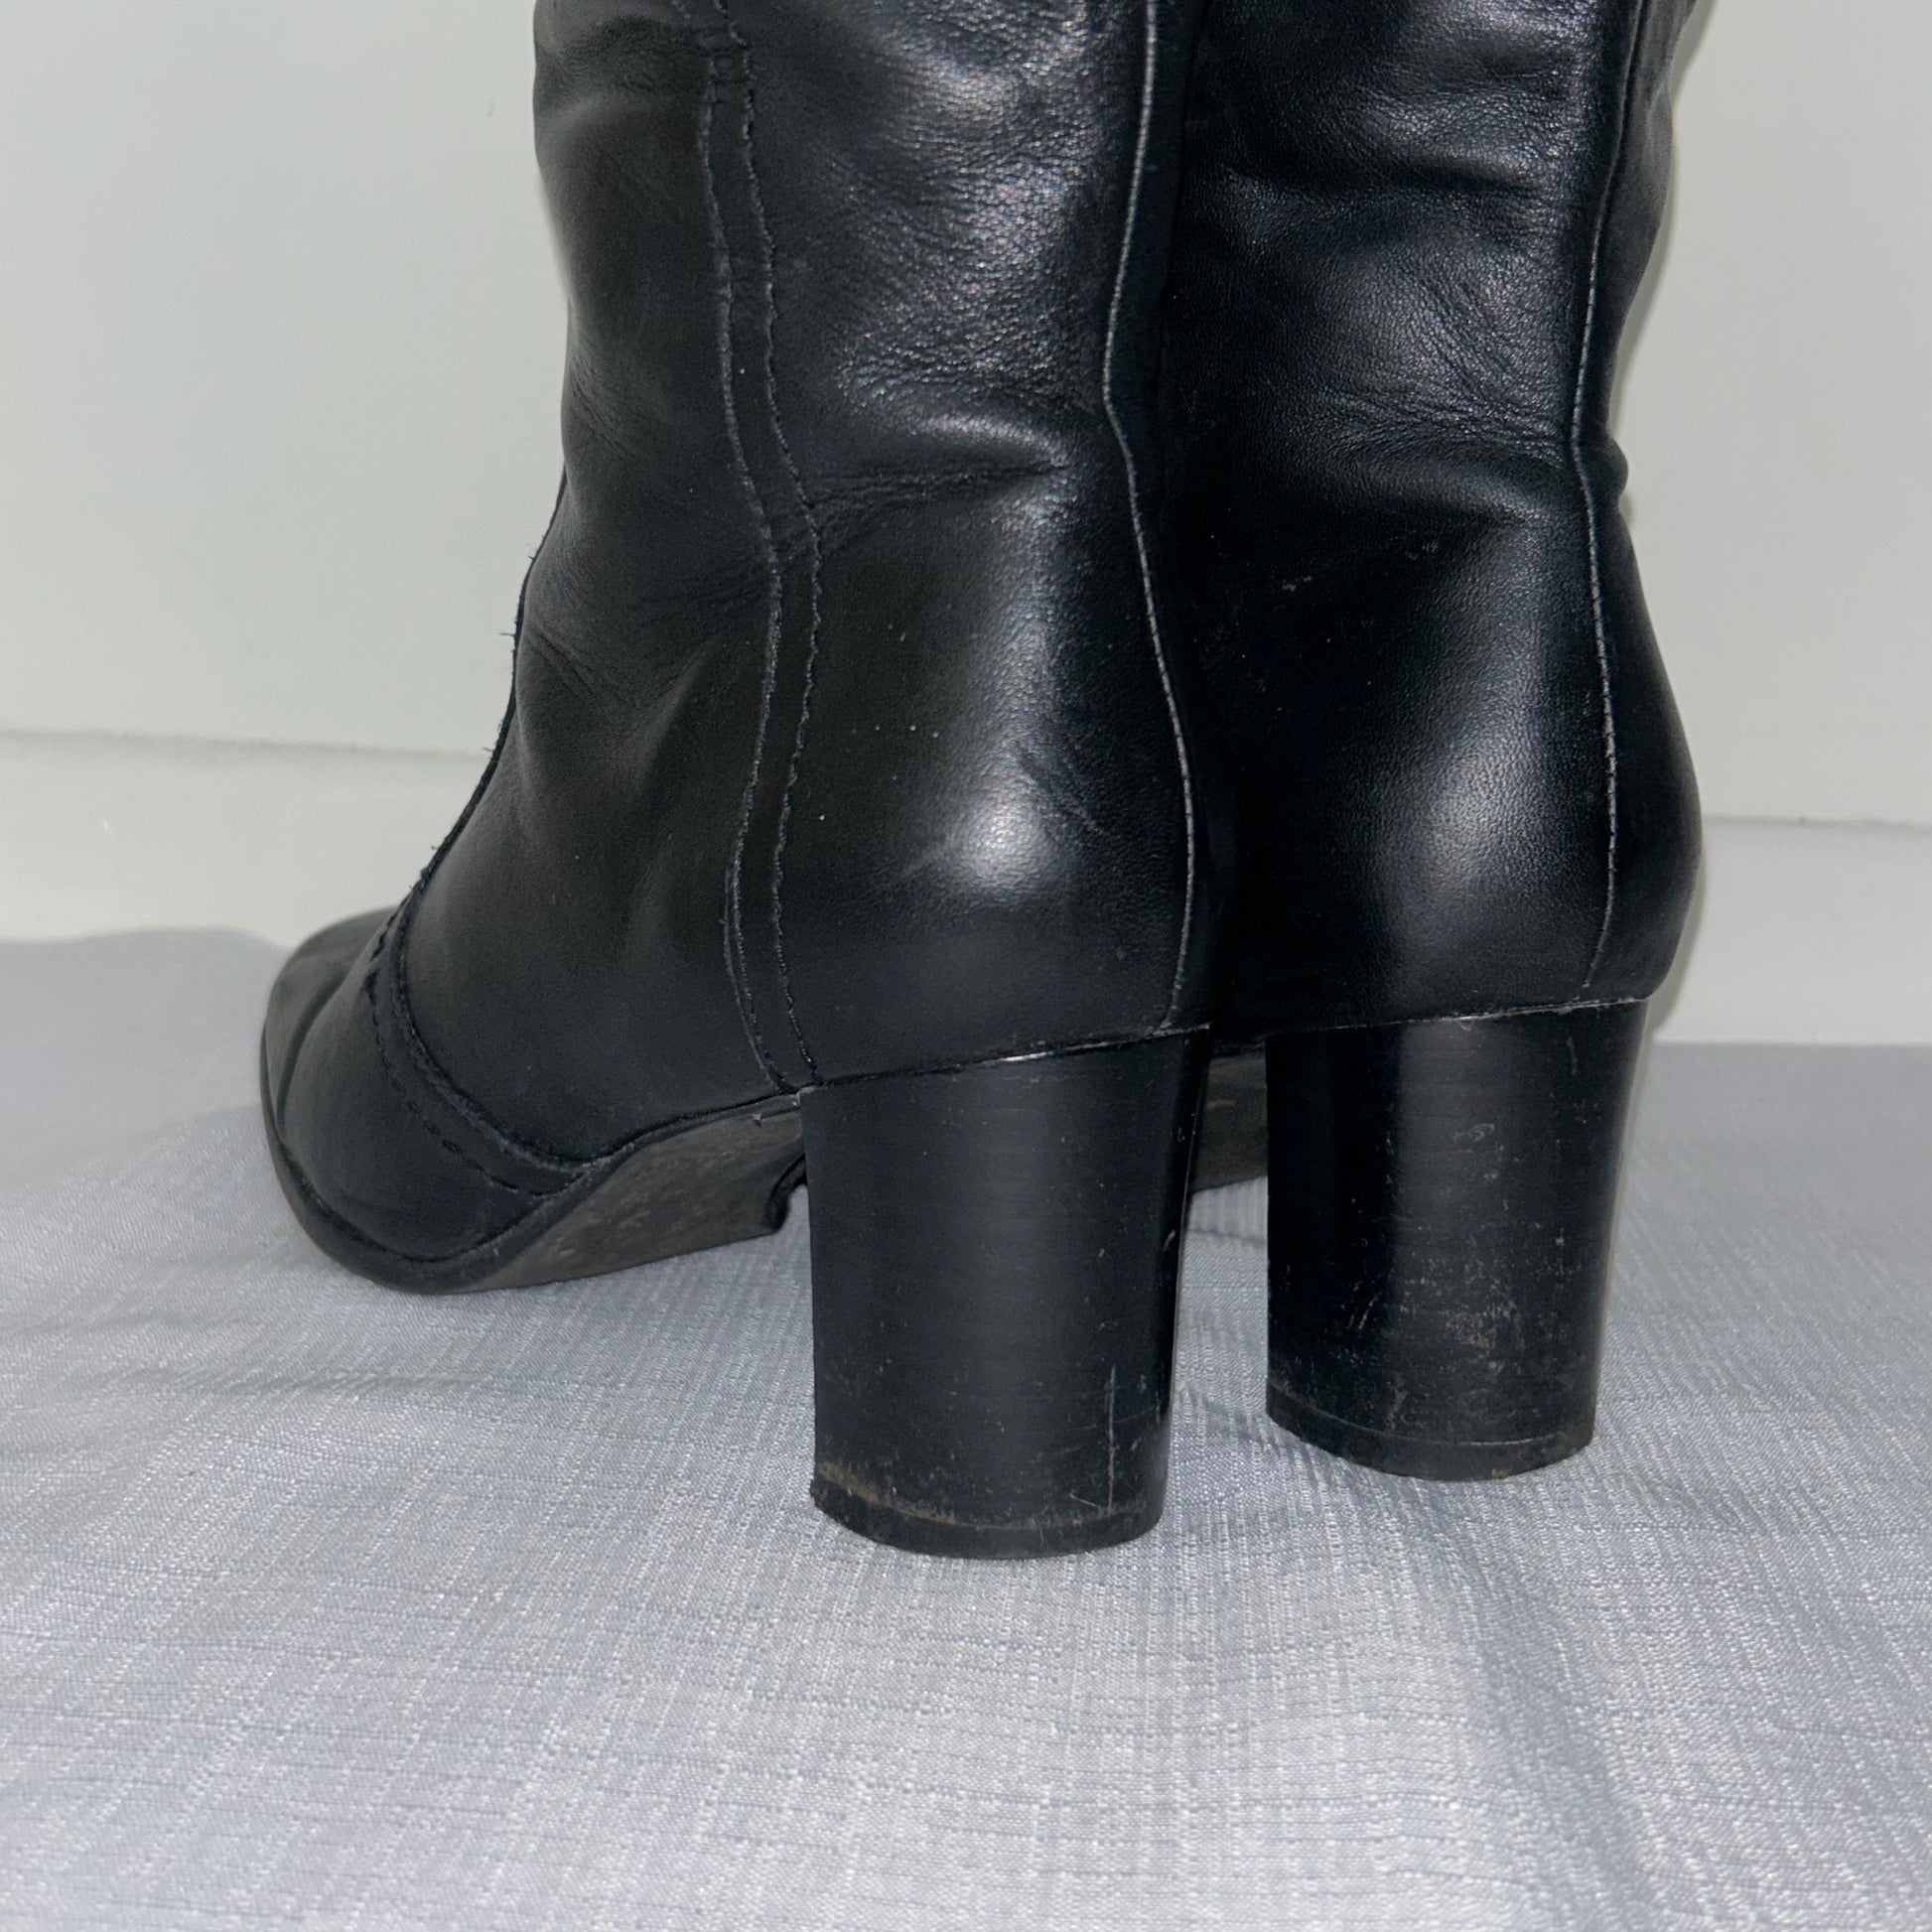 heels of black knee high real leather boots shown on a white background